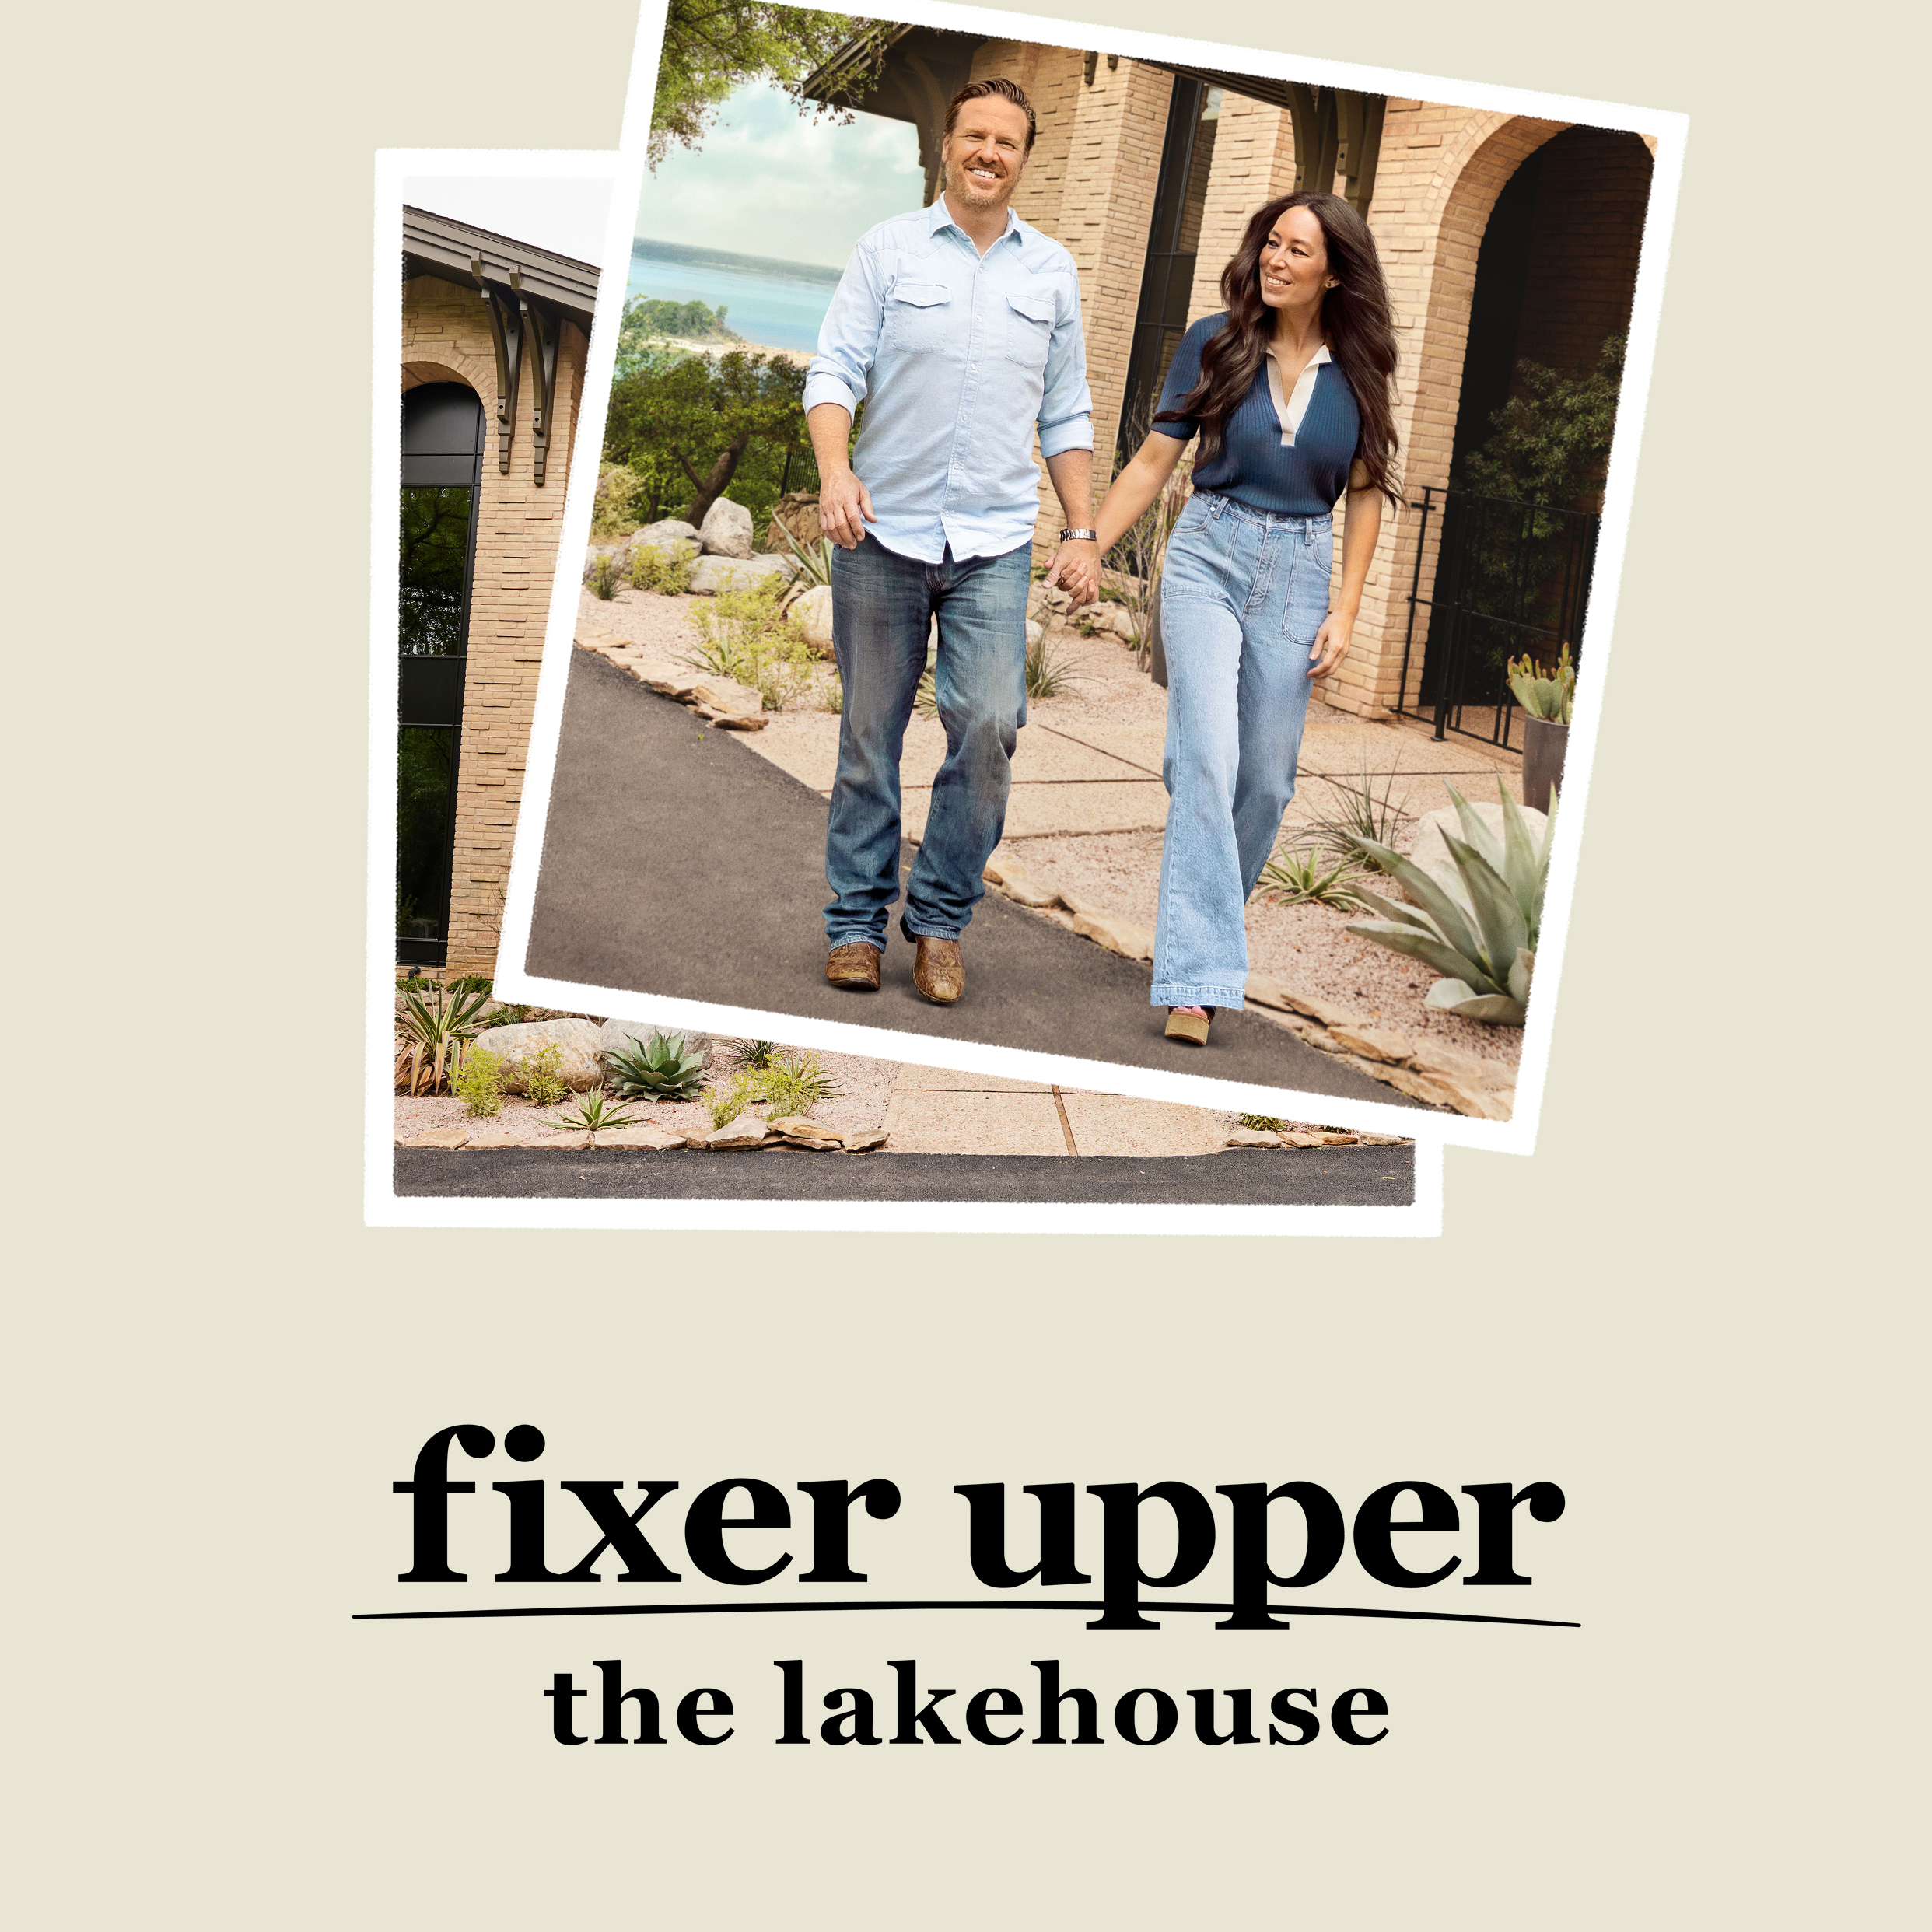 FIXER UPPER: The Lakehouse